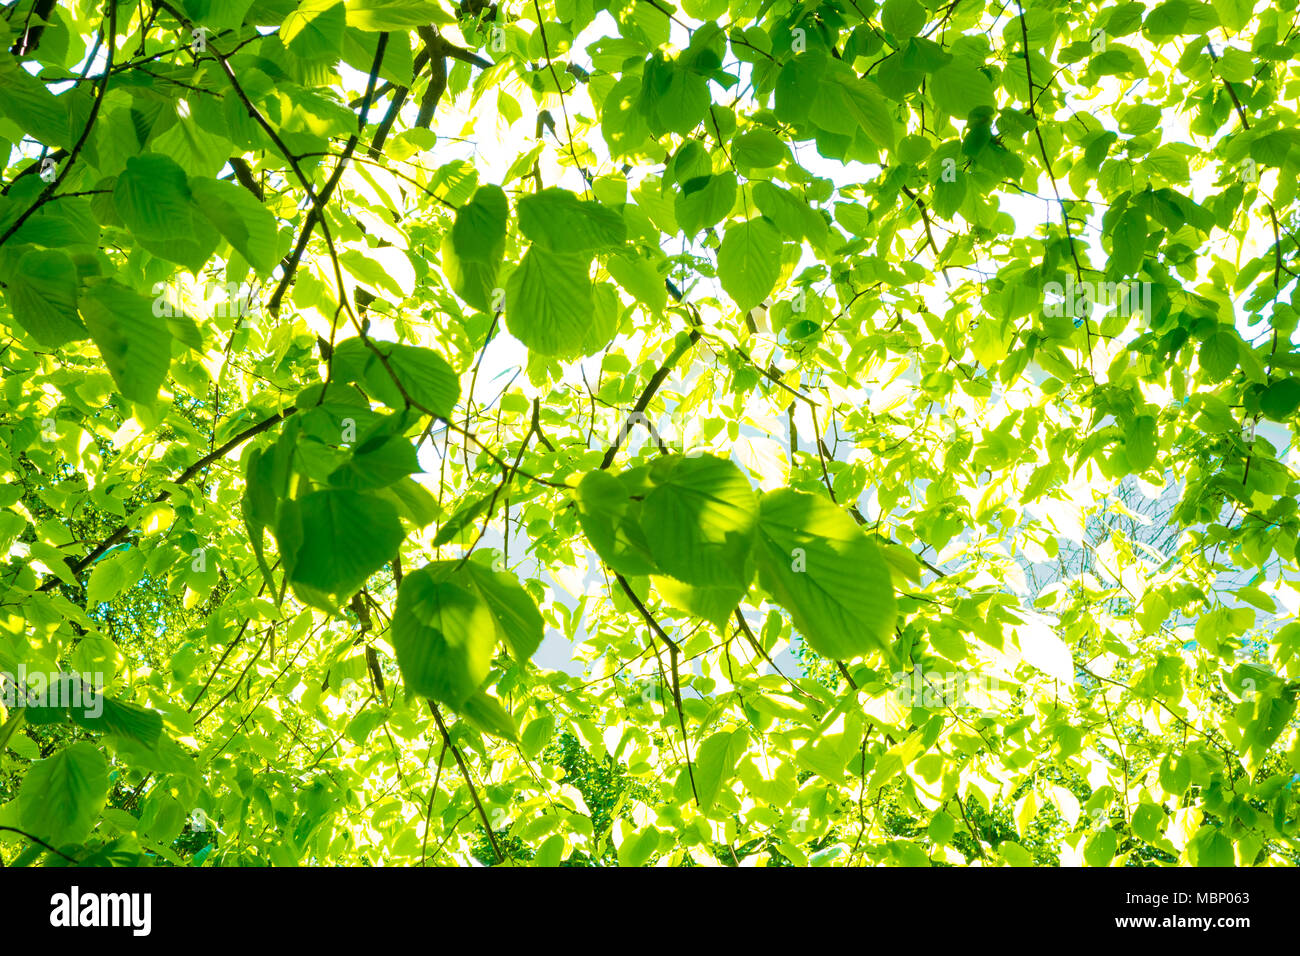 Nature spring summer background with green leaves branch and sunlight. Stock Photo